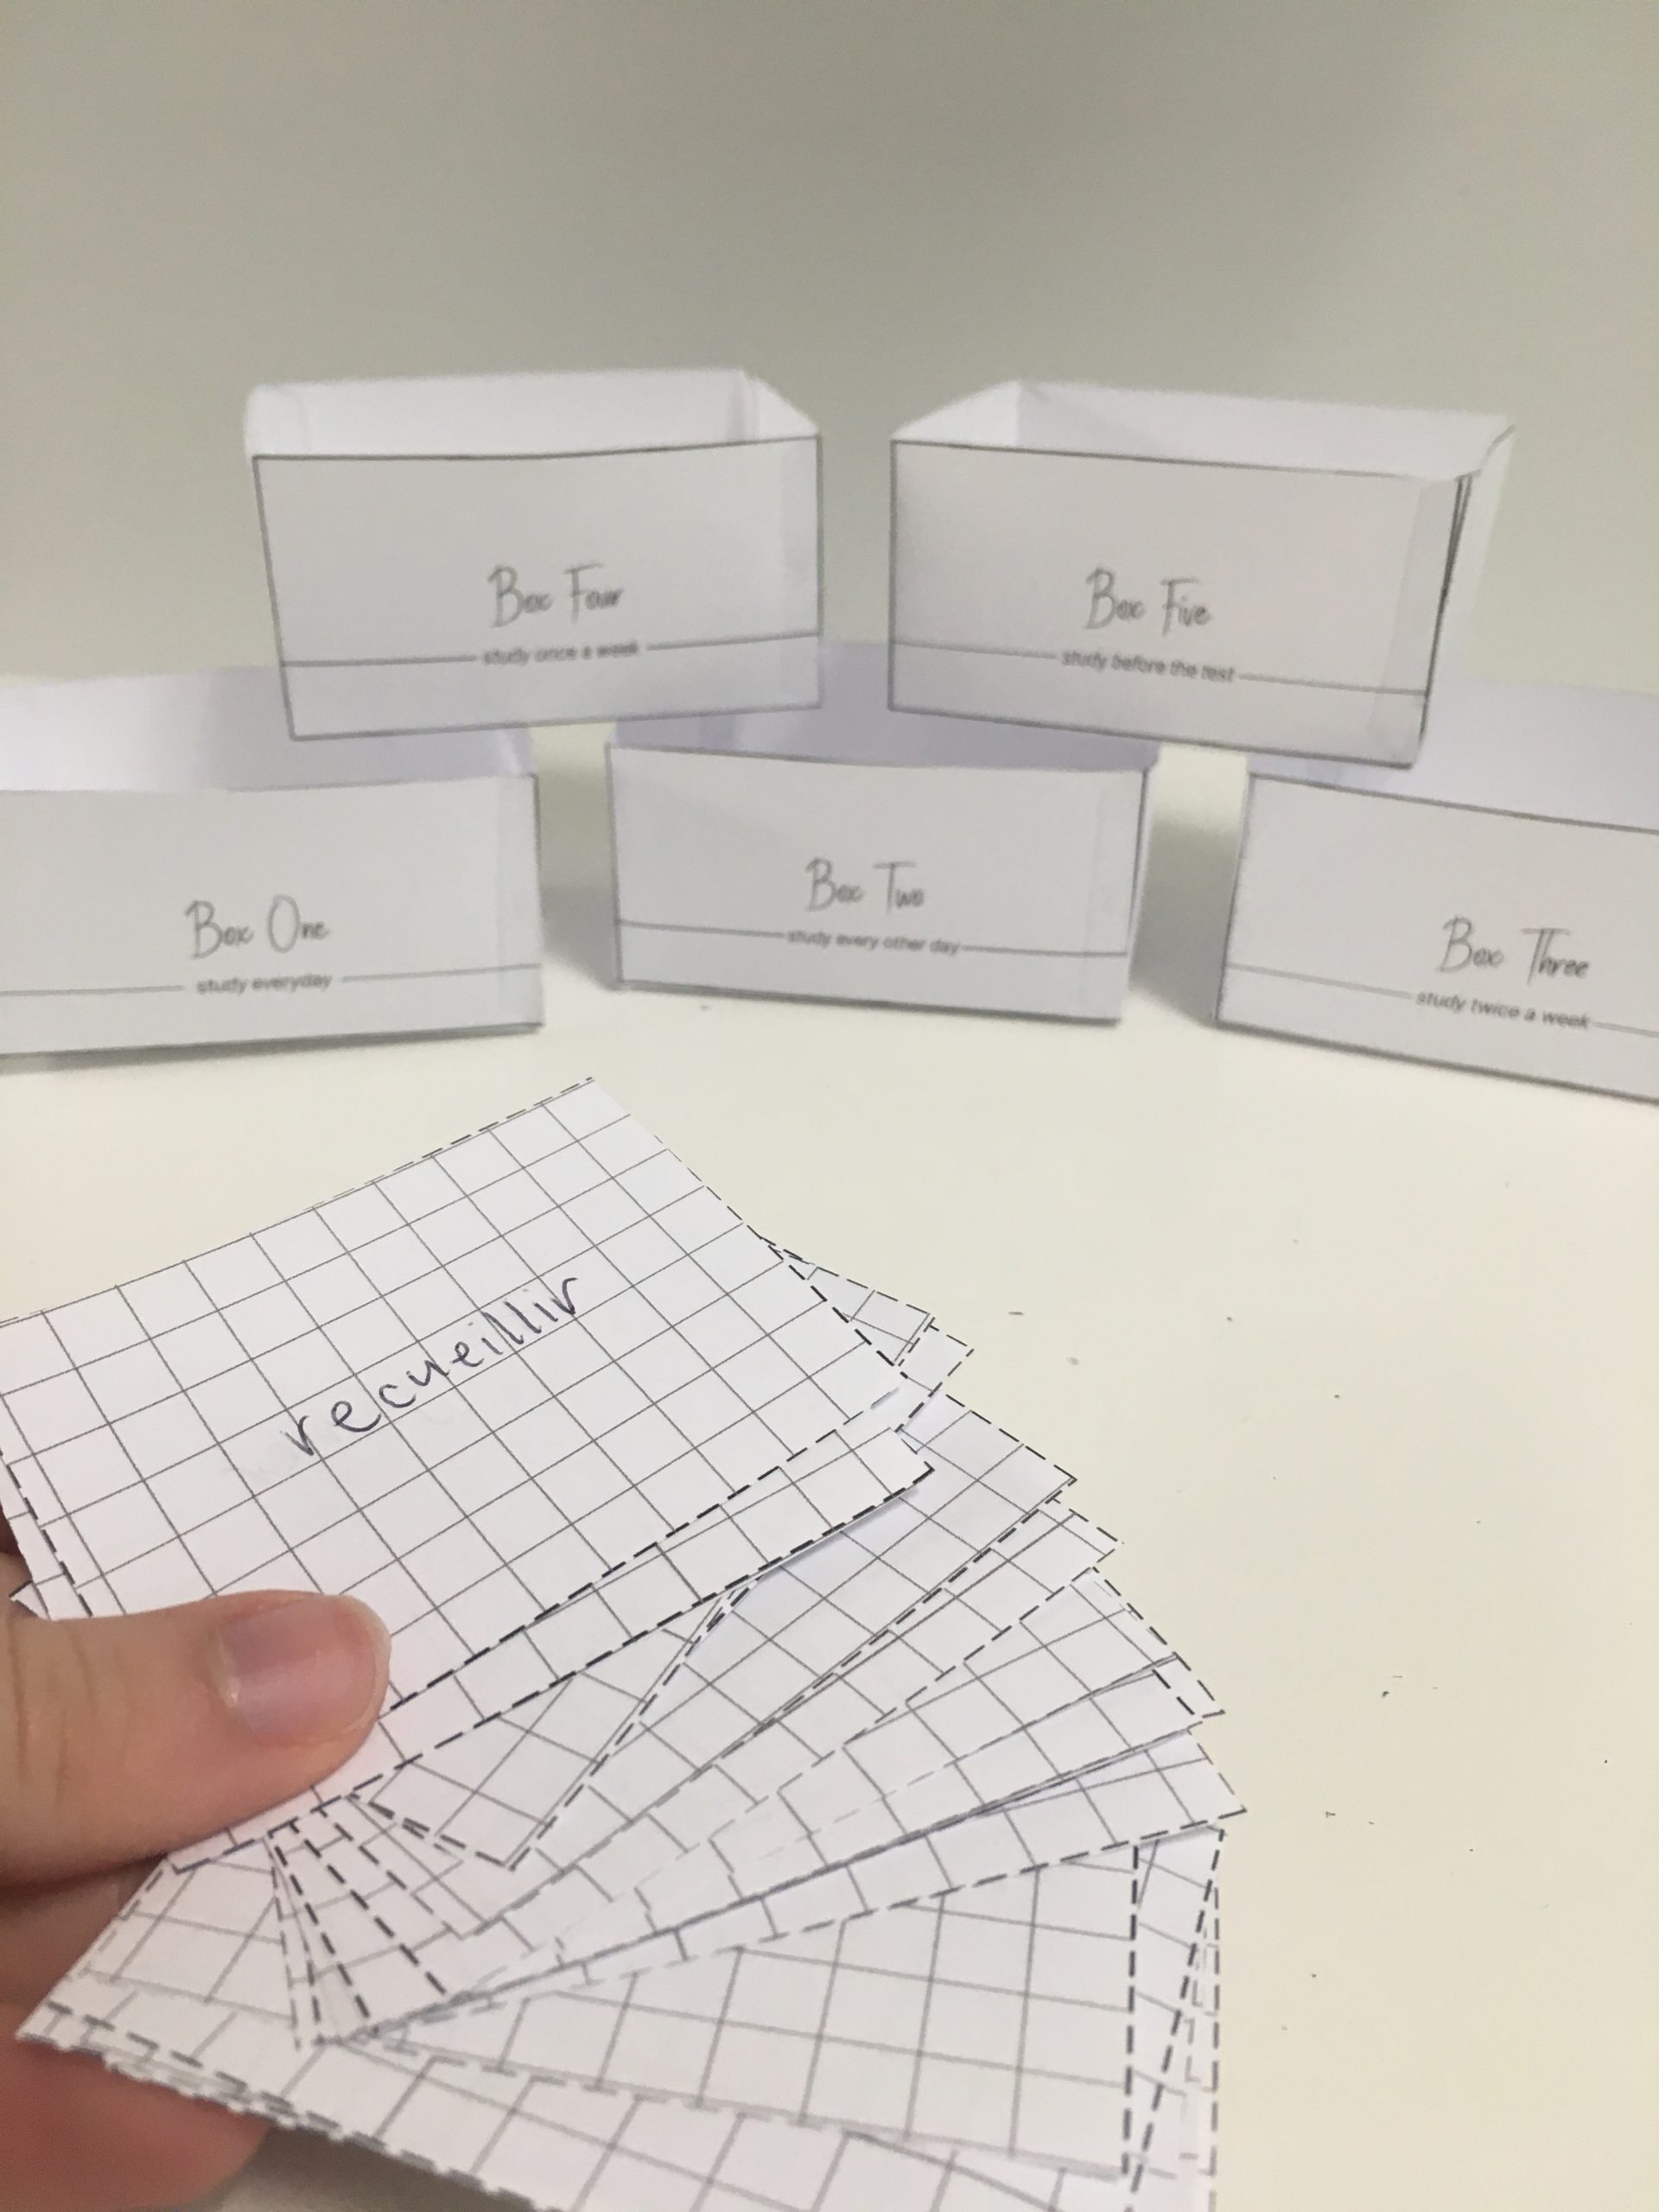 How to study flashcards using the Leitner system 